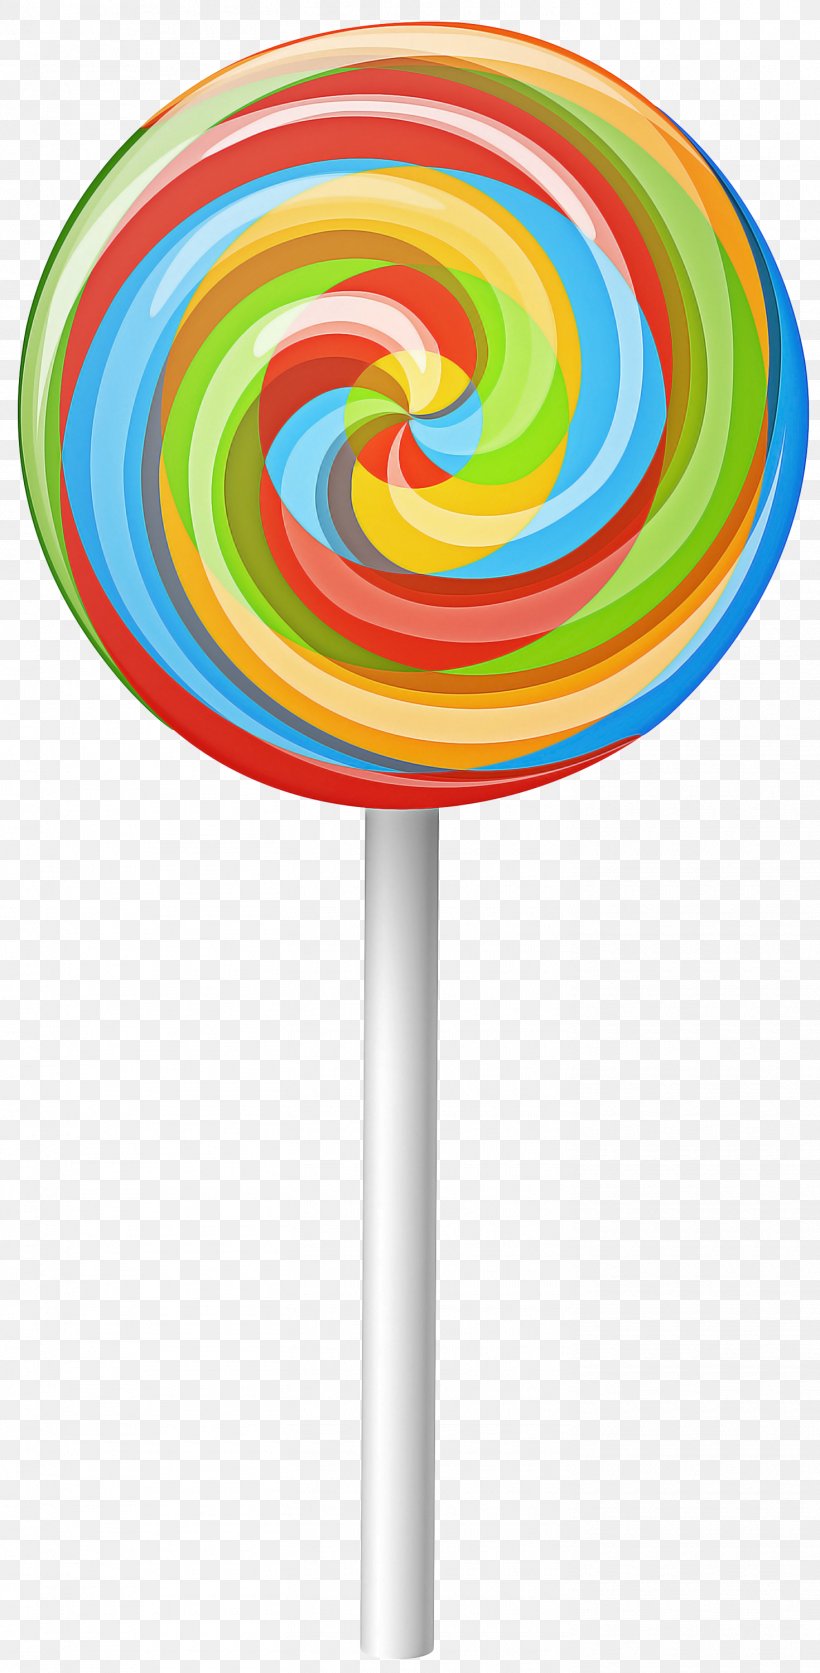 Lollipop Stick Candy Confectionery Candy Food, PNG, 1470x3000px, Lollipop, Candy, Confectionery, Food, Stick Candy Download Free